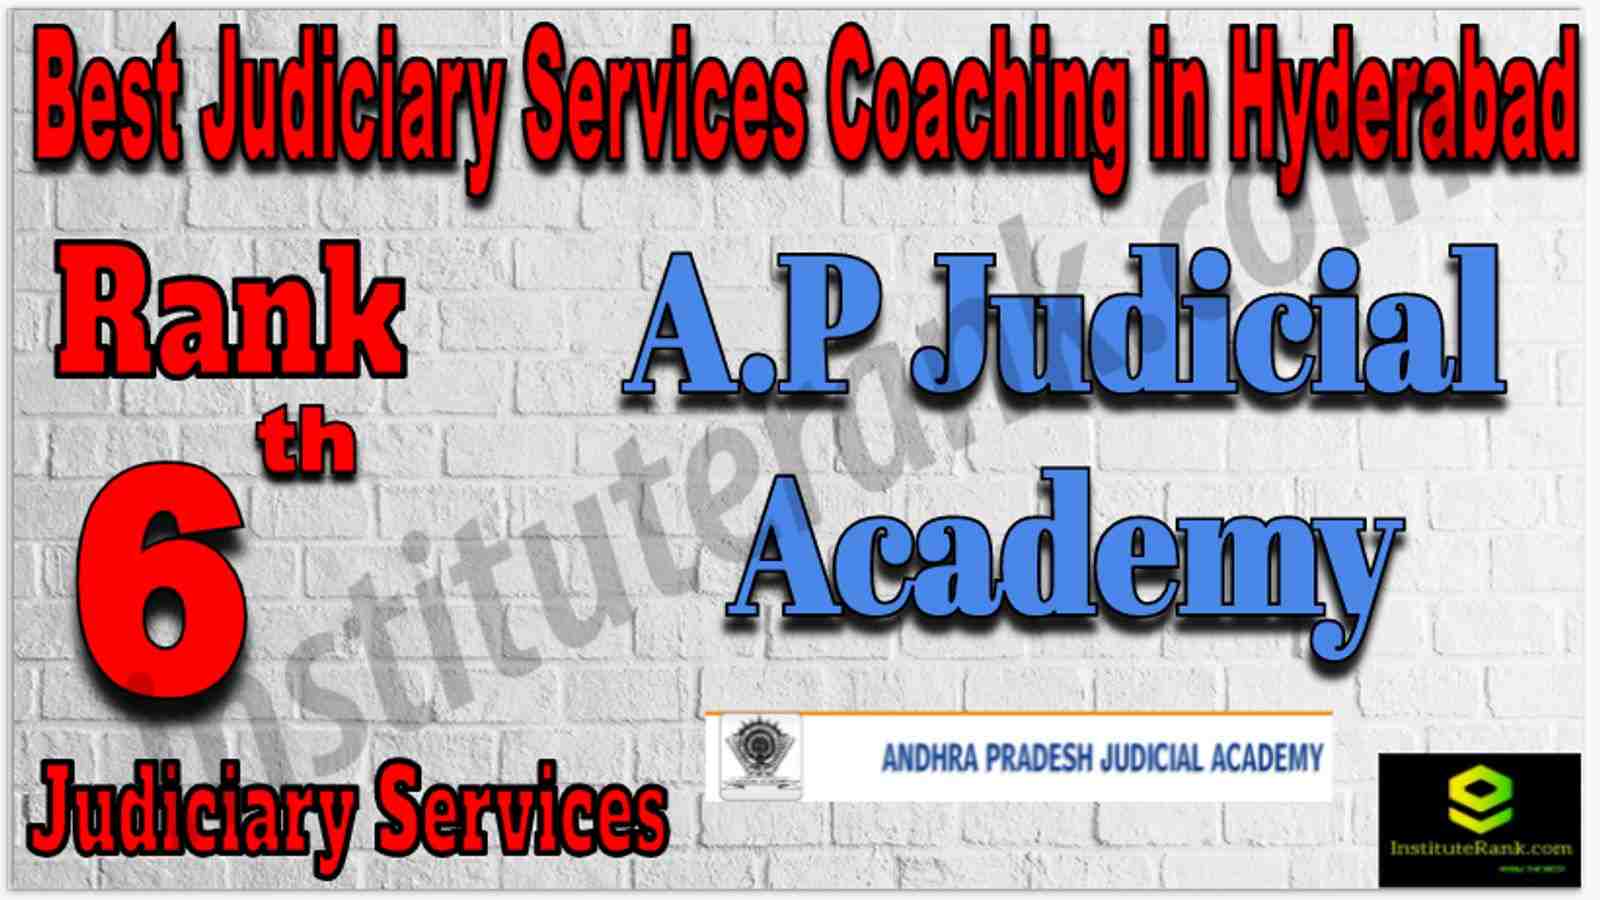 Rank 6 Best Judiciary Services Coaching in Hyderabad